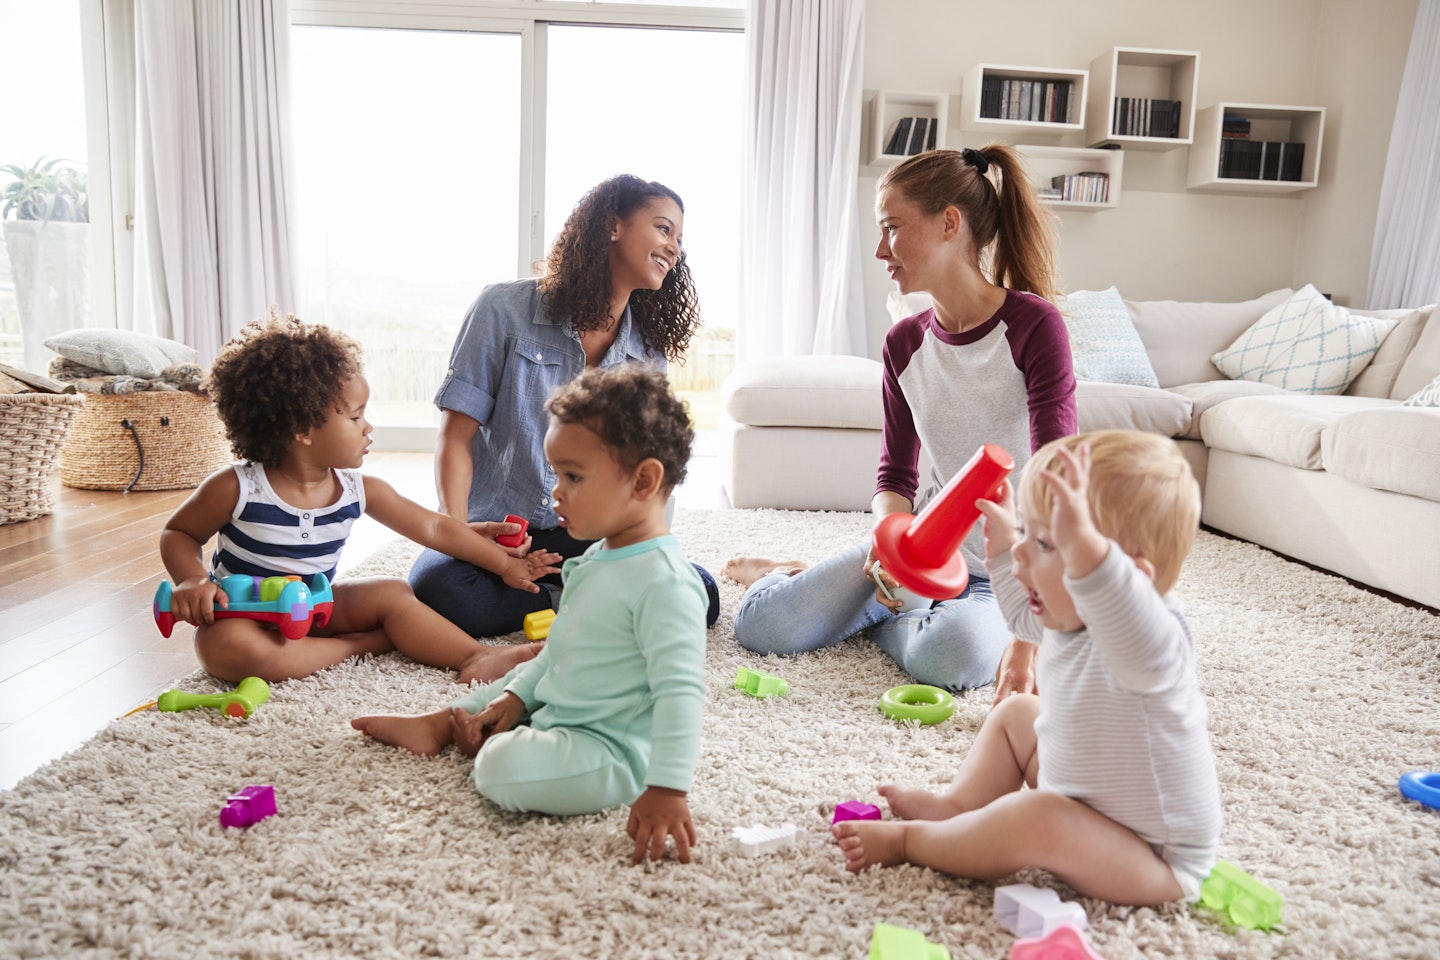 Host your own Stay Play groups